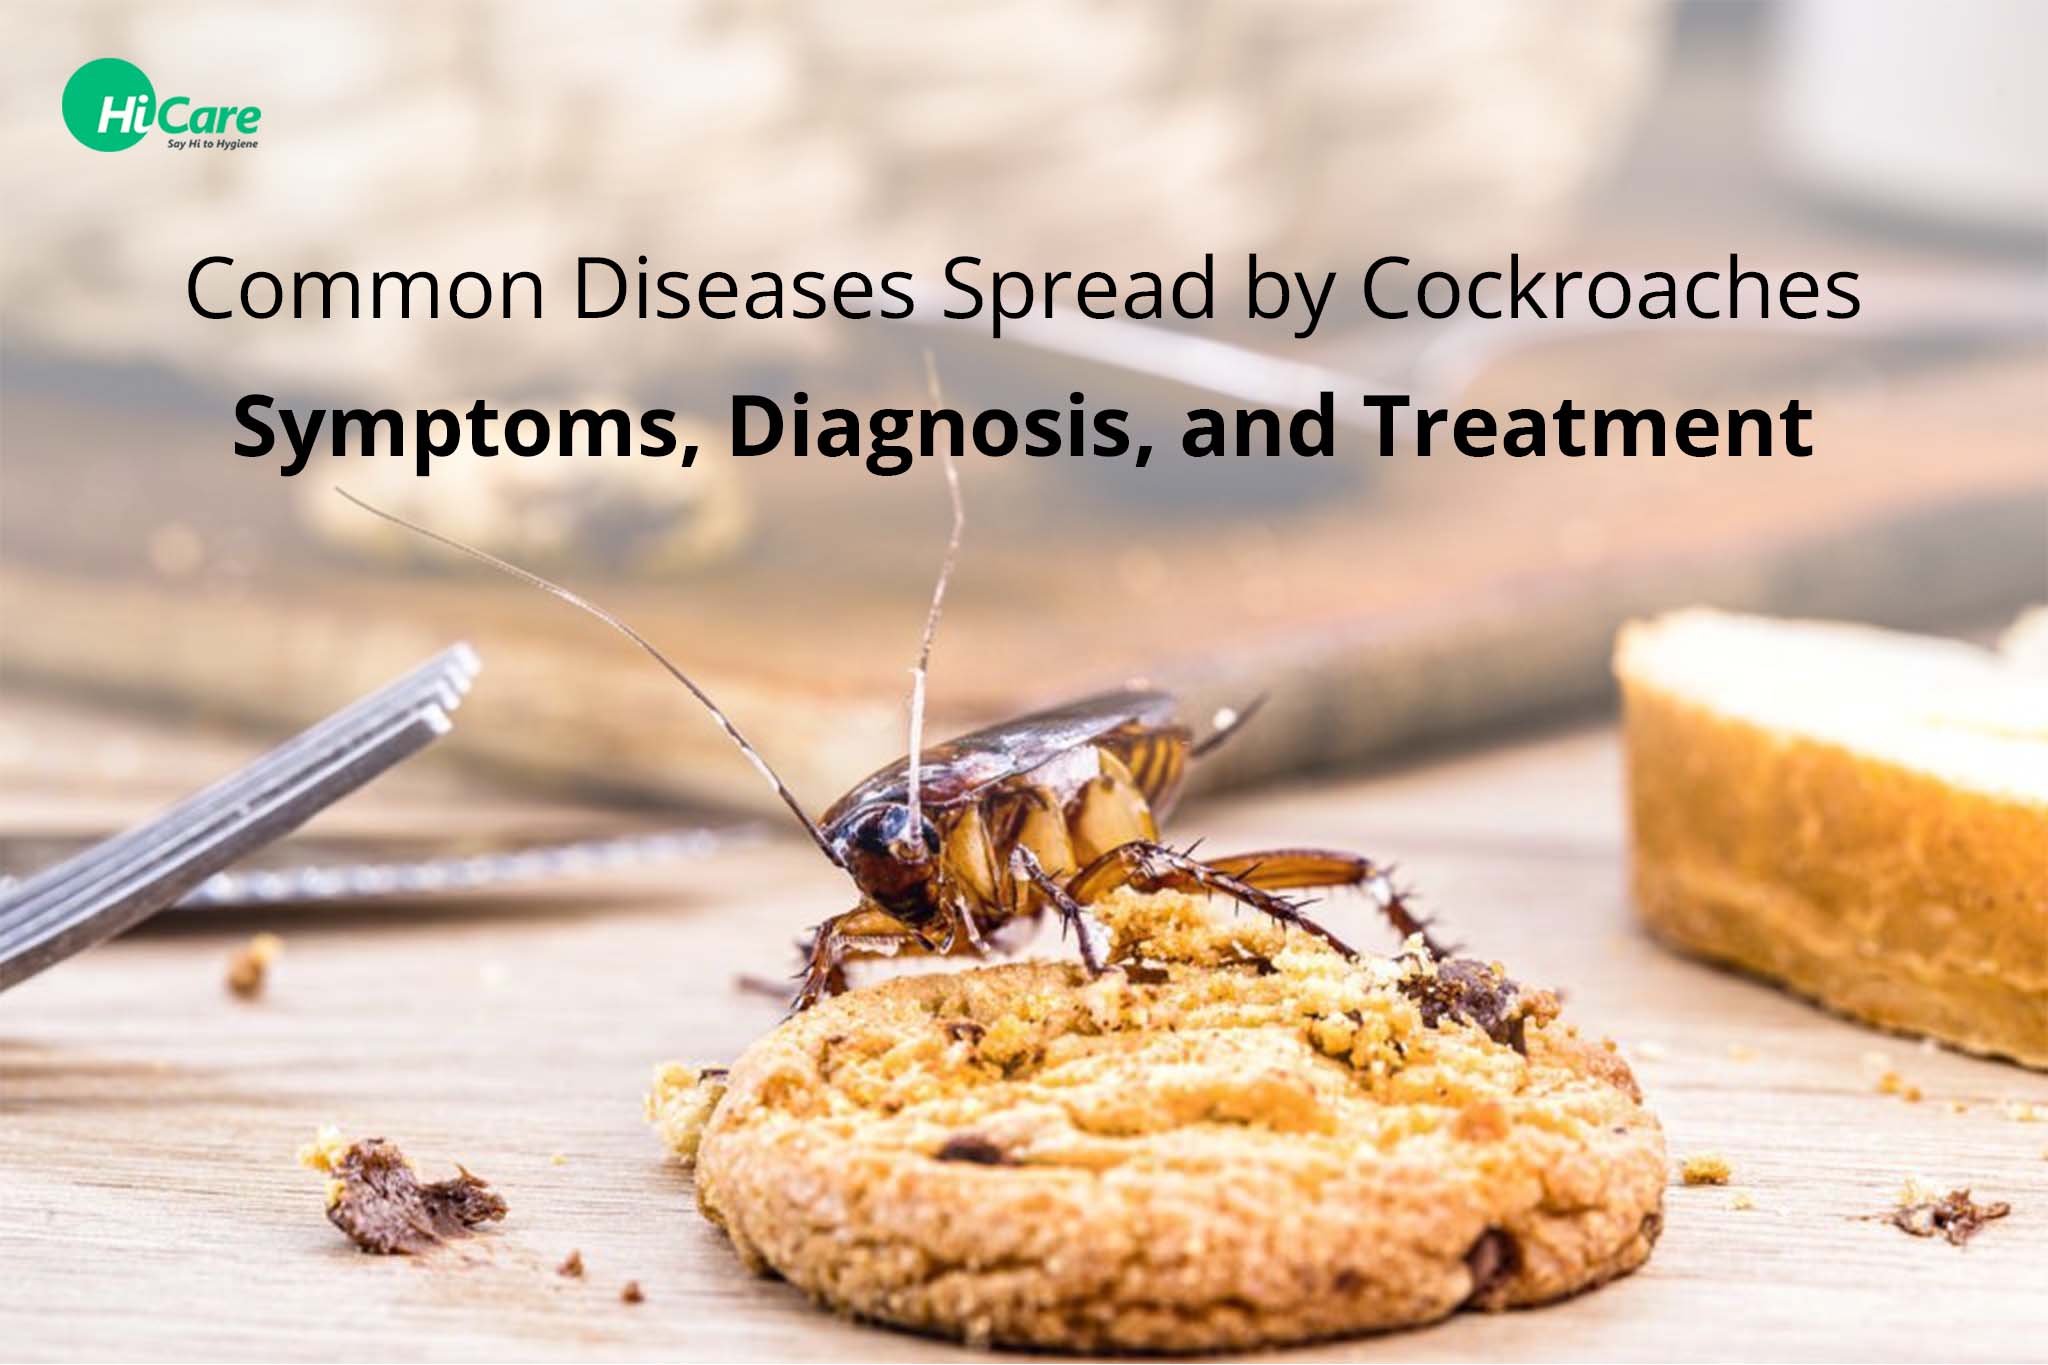 Common Diseases Spread by Cockroaches: Types, Symptoms & Treatment